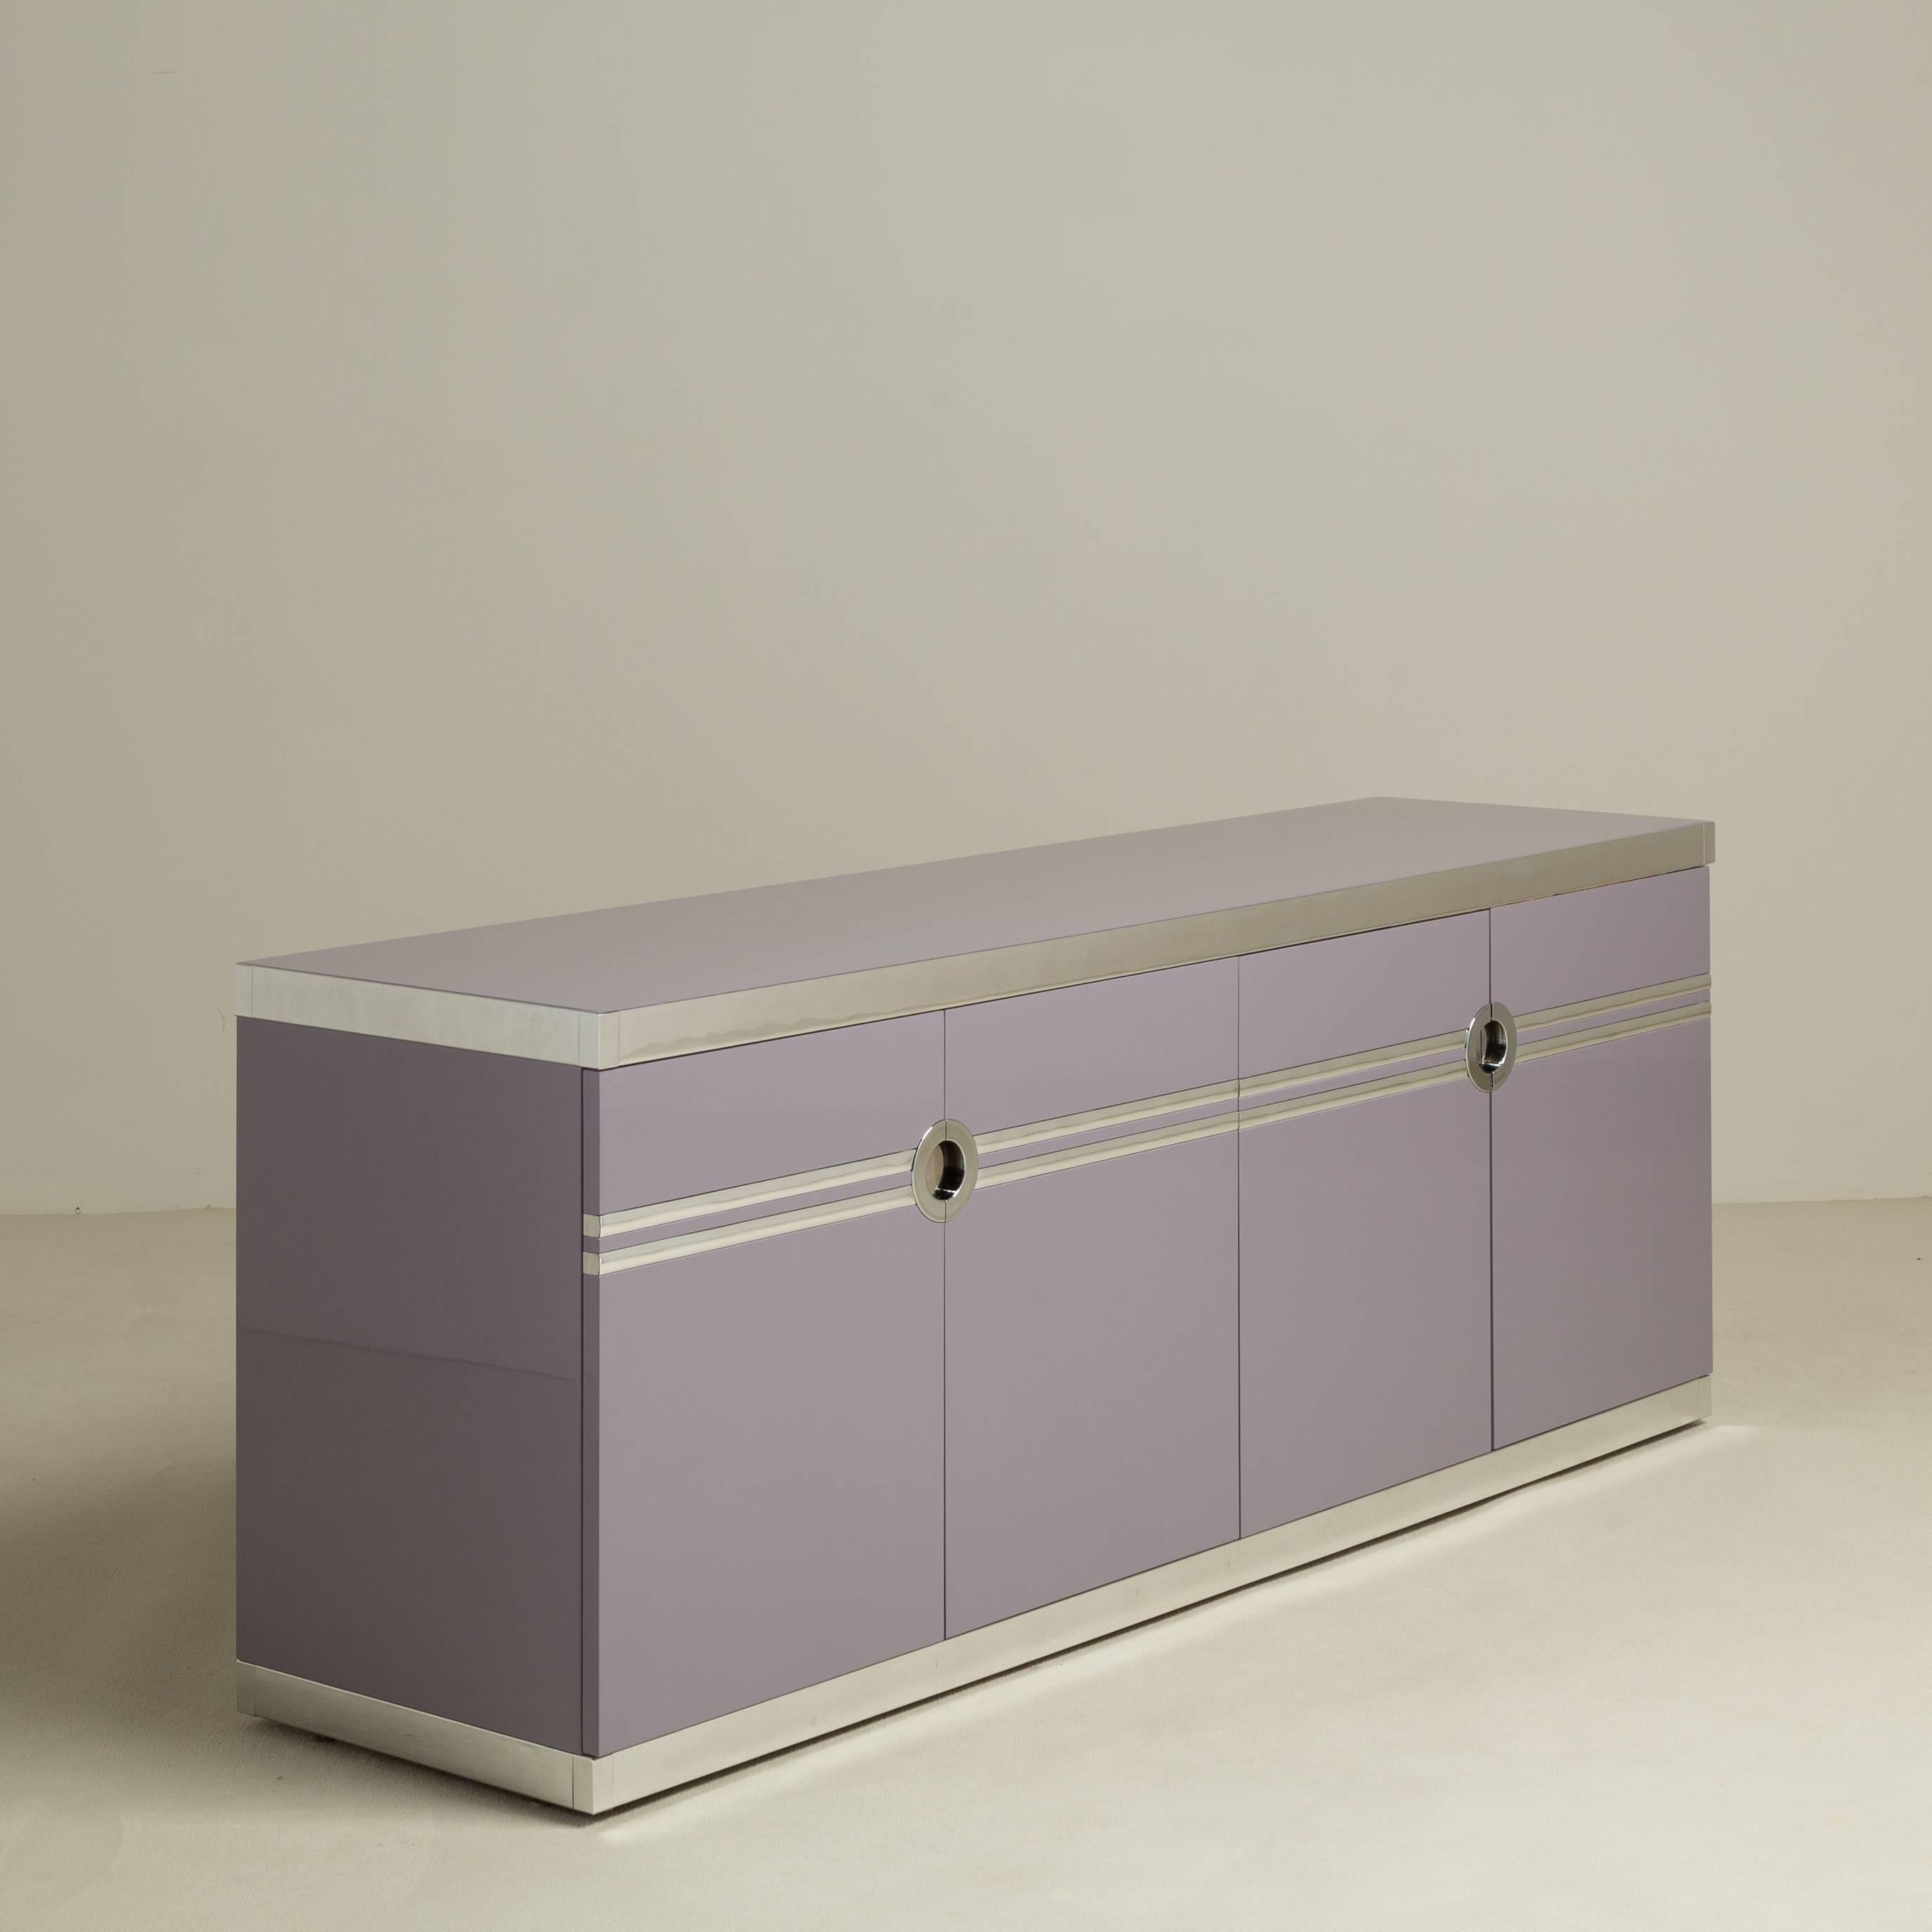 A Pierre Cardin designed four-door lilac lacquered cabinet 1970s, Talisman Edition. Entirely refurbished by Talisman 

Prices include 20% VAT which is removed for items shipped outside the EU.